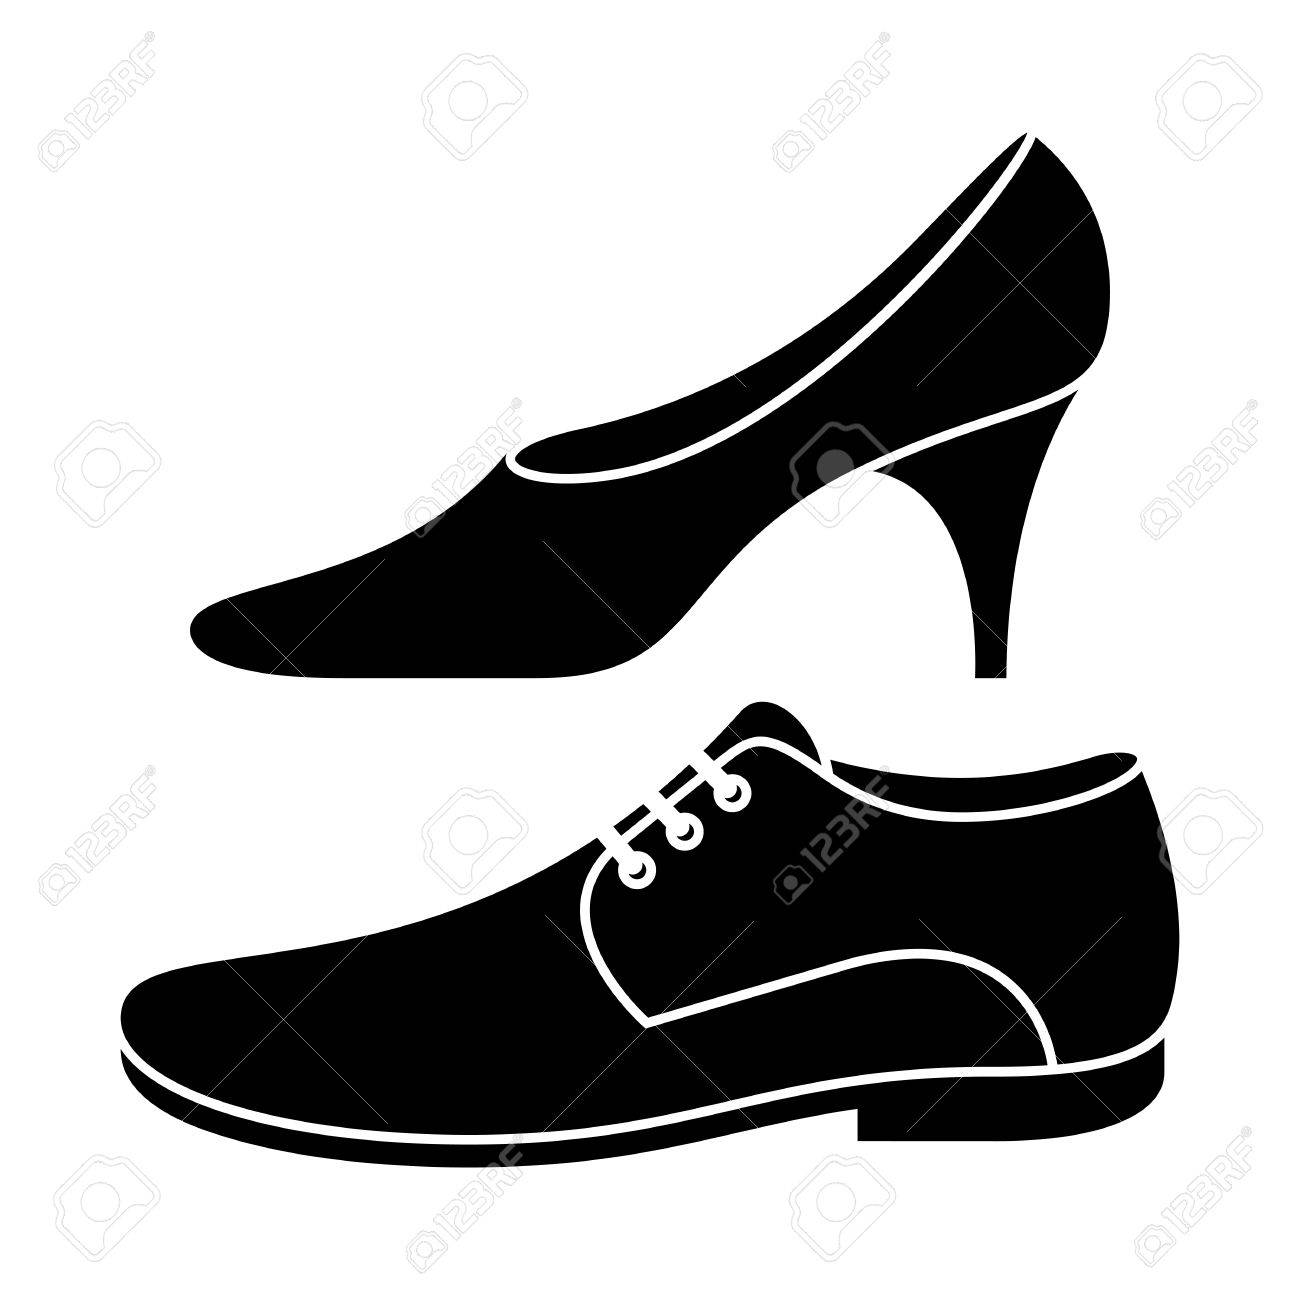 Illustration of Womens shoes 